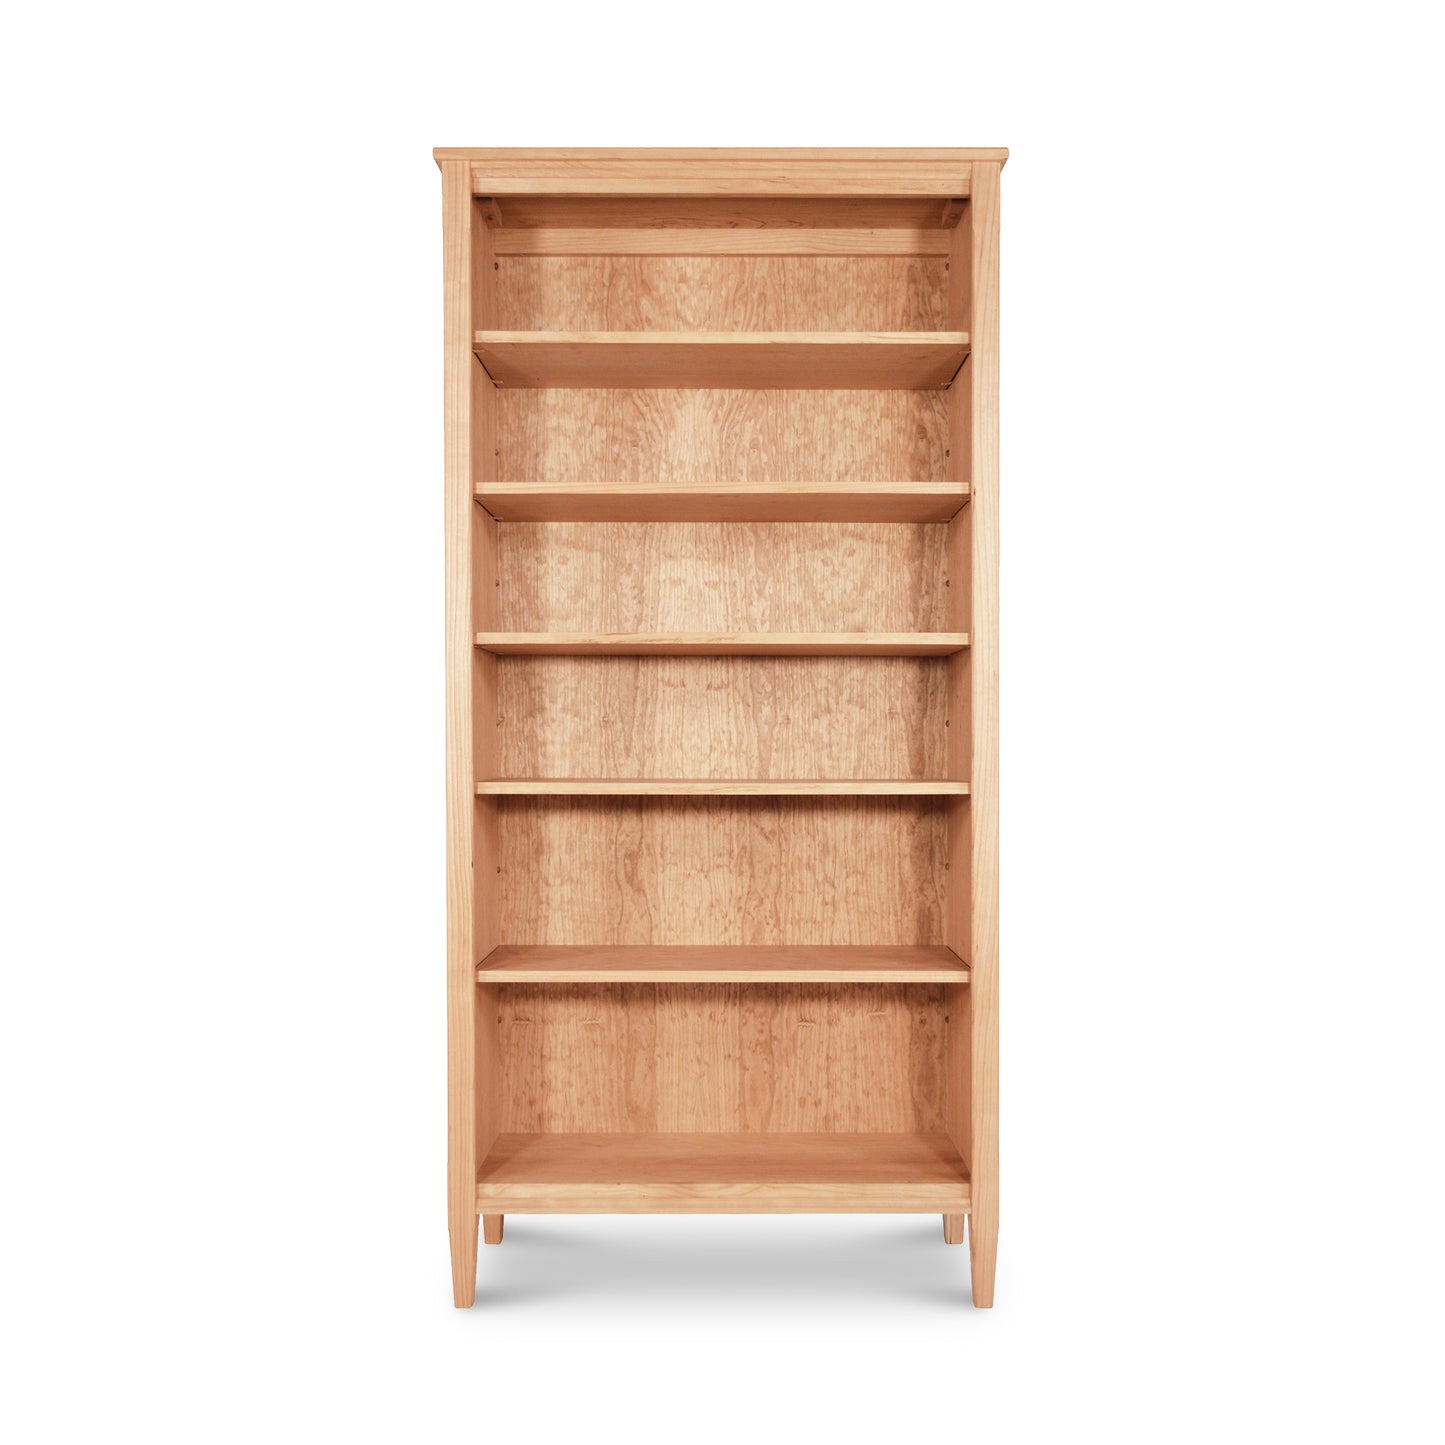 Empty Maple Corner Woodworks Vermont Shaker Bookcase with five shelves, crafted from sustainably harvested hardwoods, against a white background.